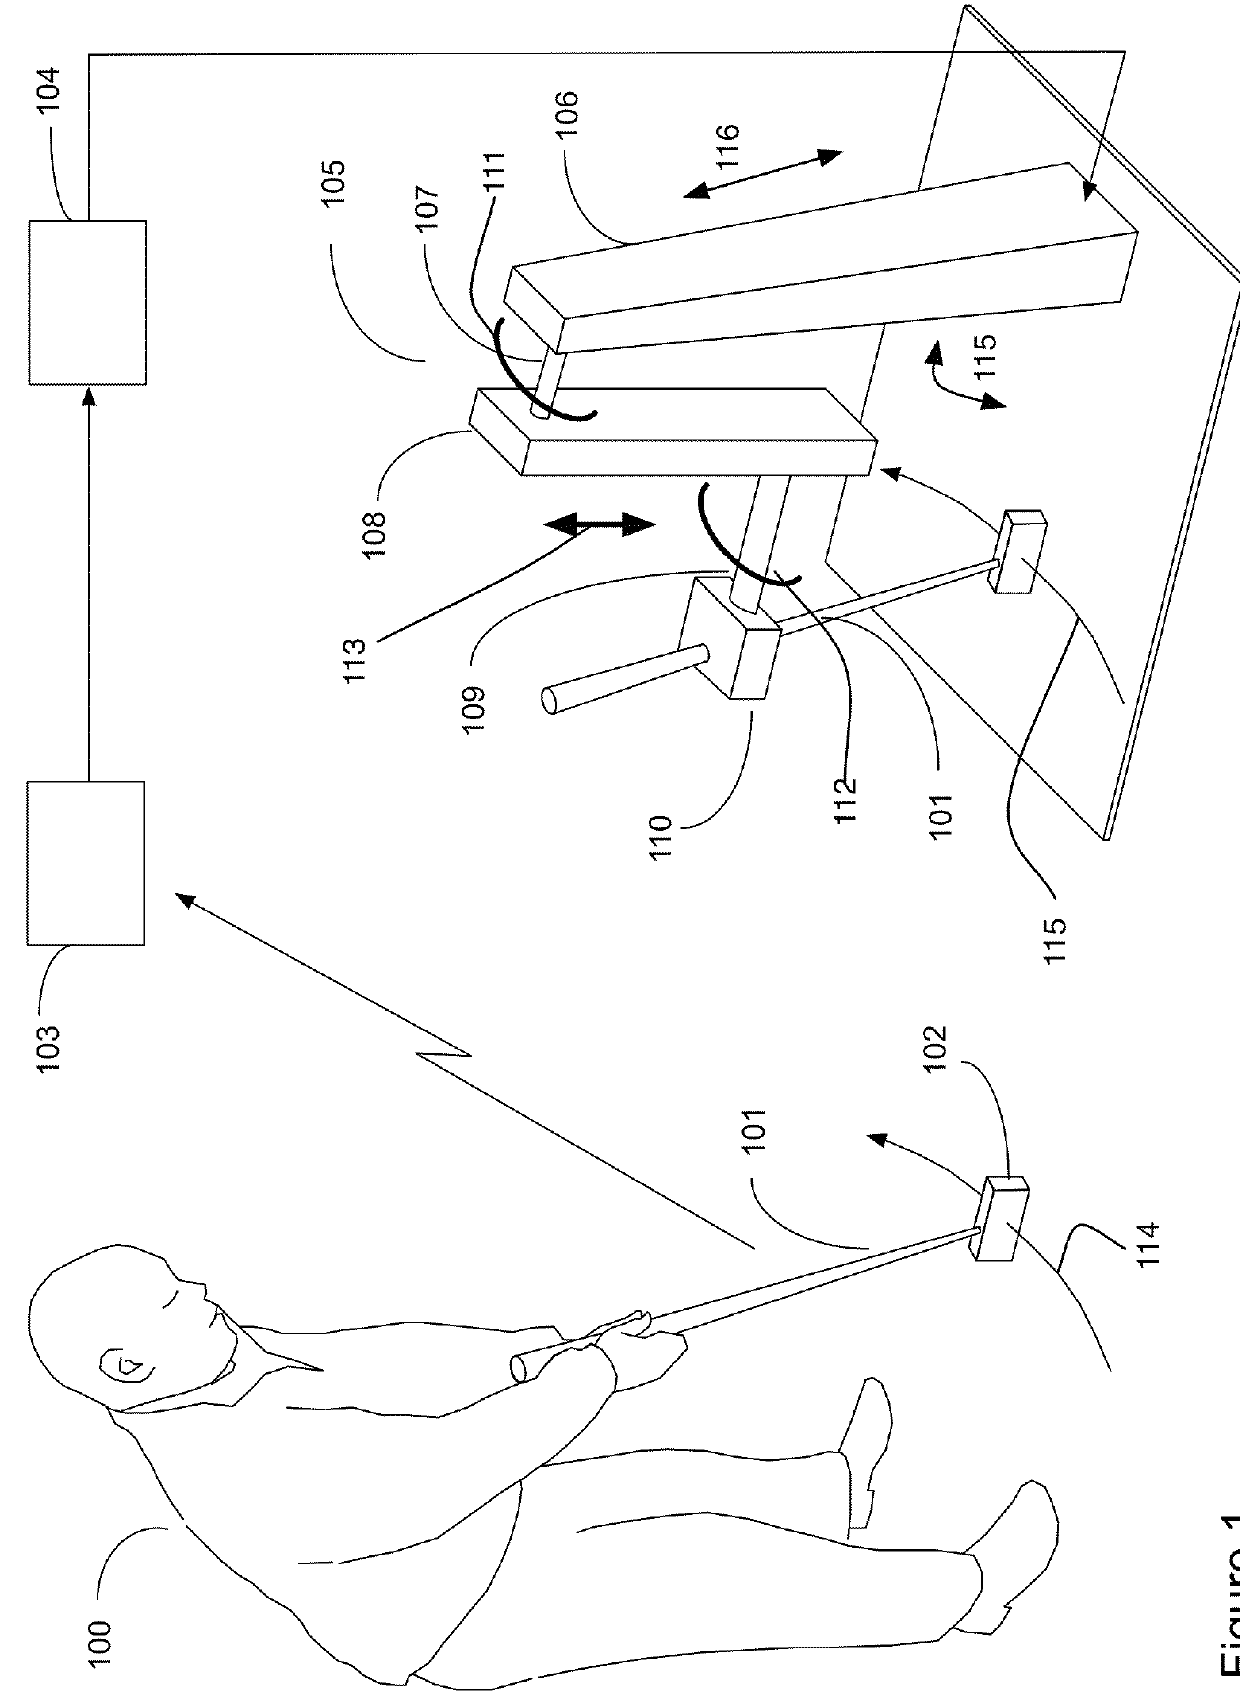 Method of recording a motion for robotic playback